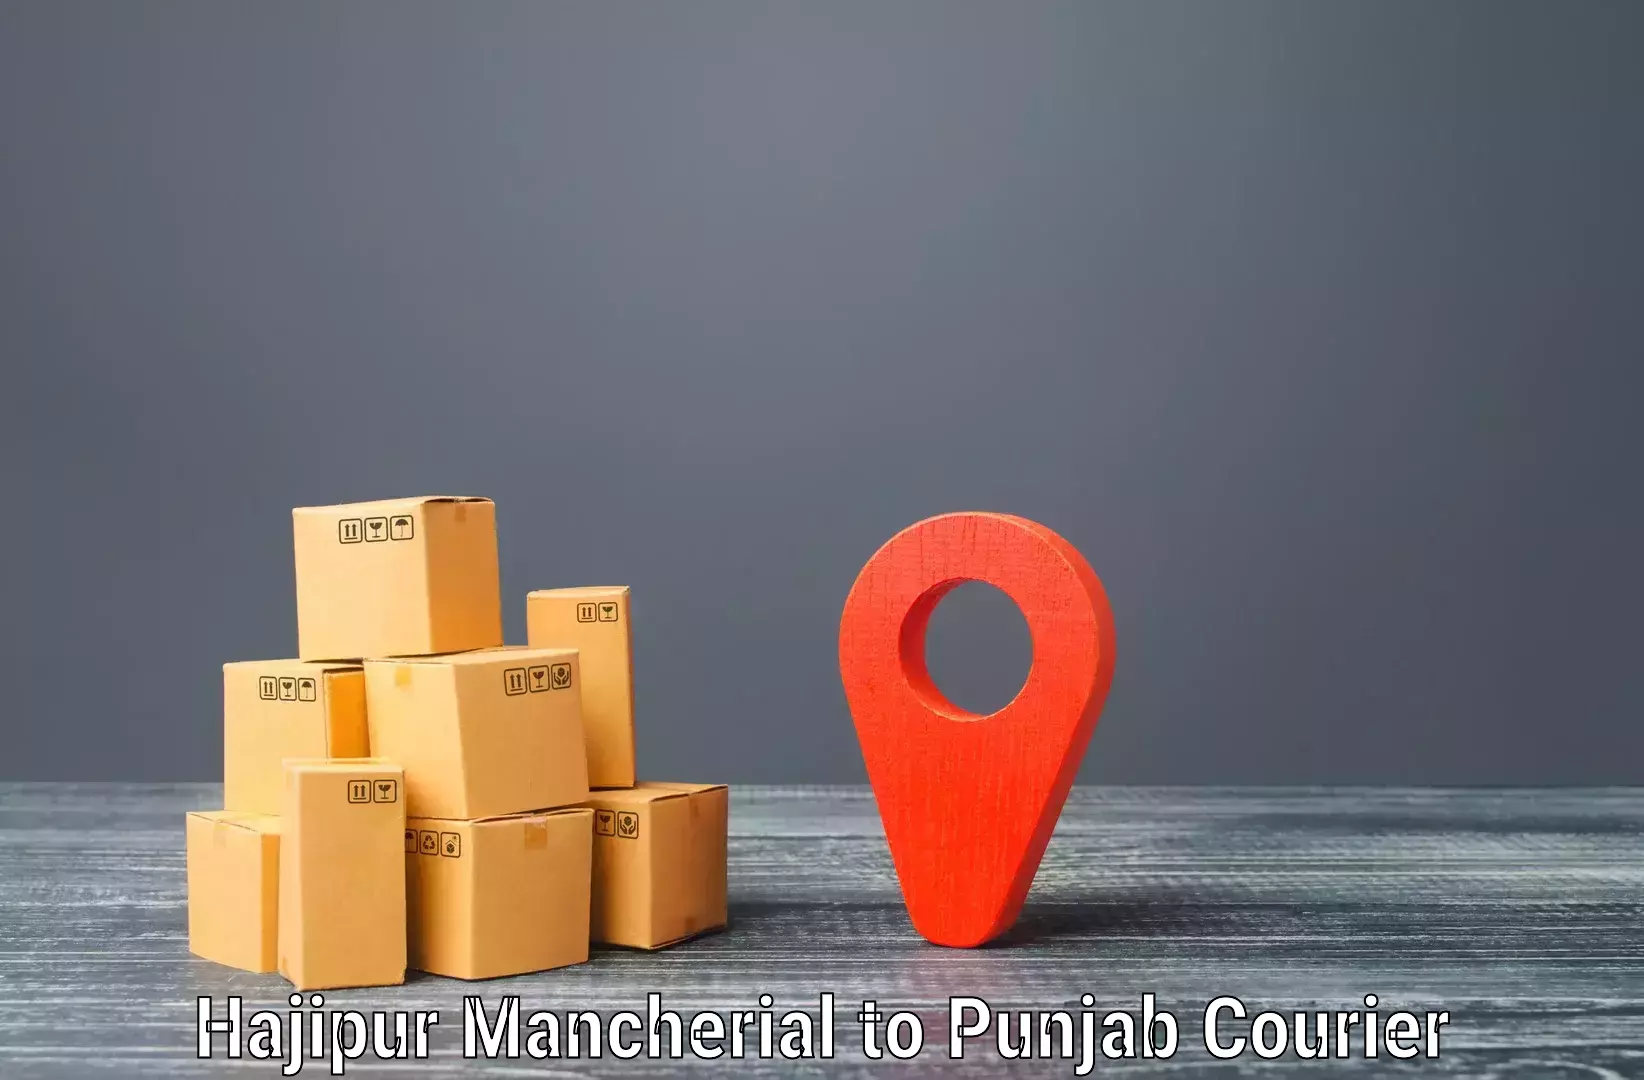 Automated parcel services Hajipur Mancherial to Bhadaur